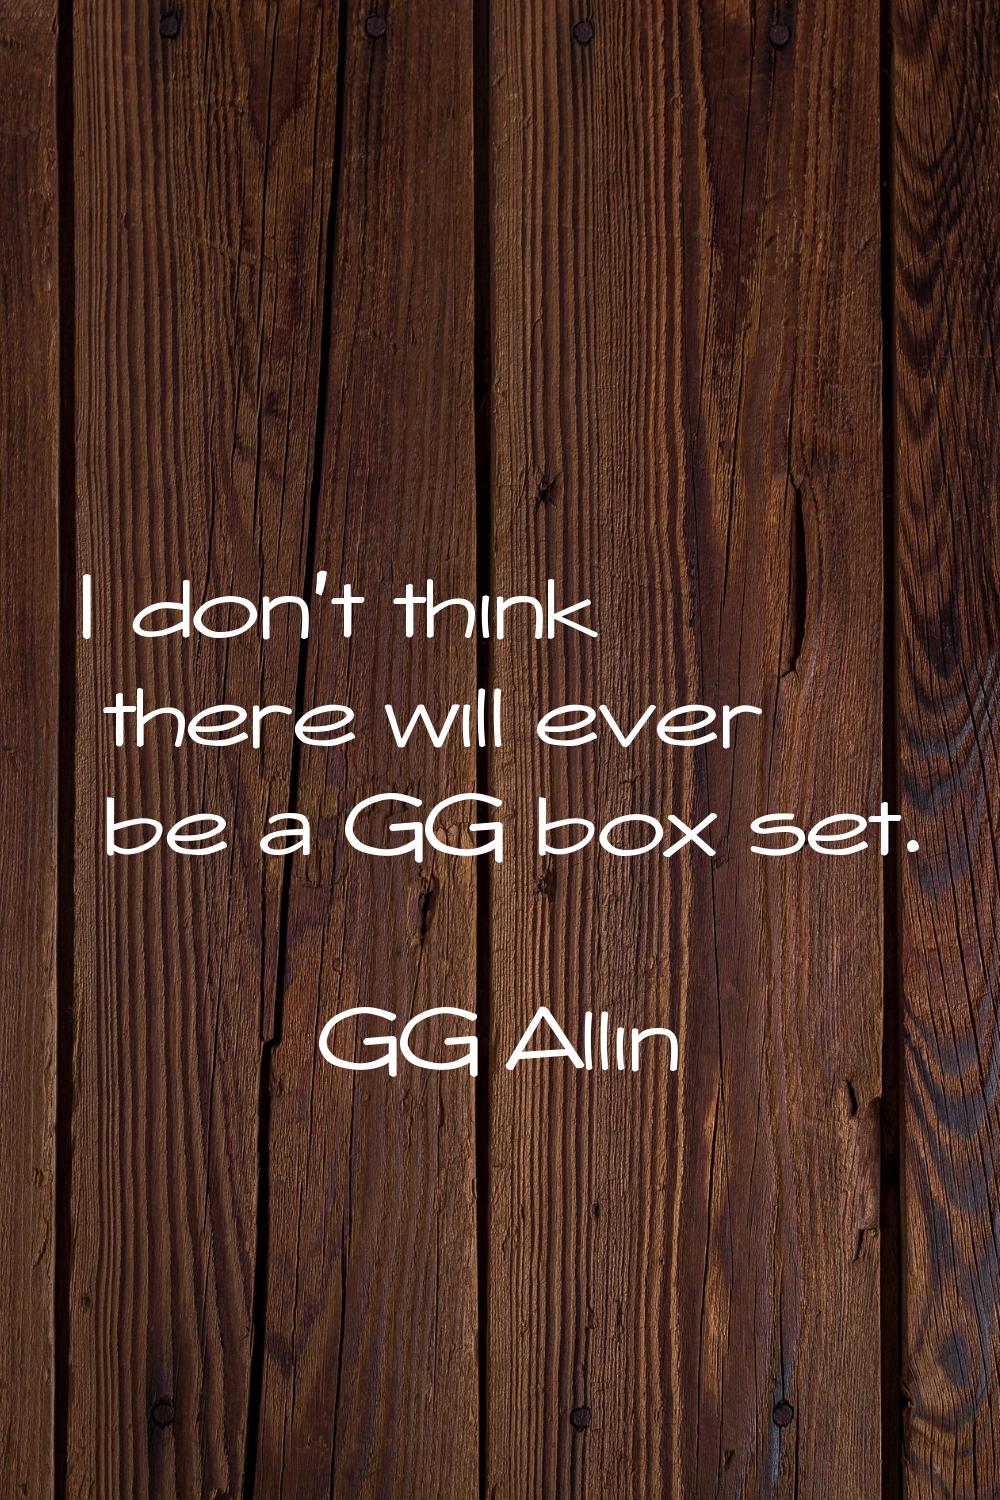 I don't think there will ever be a GG box set.